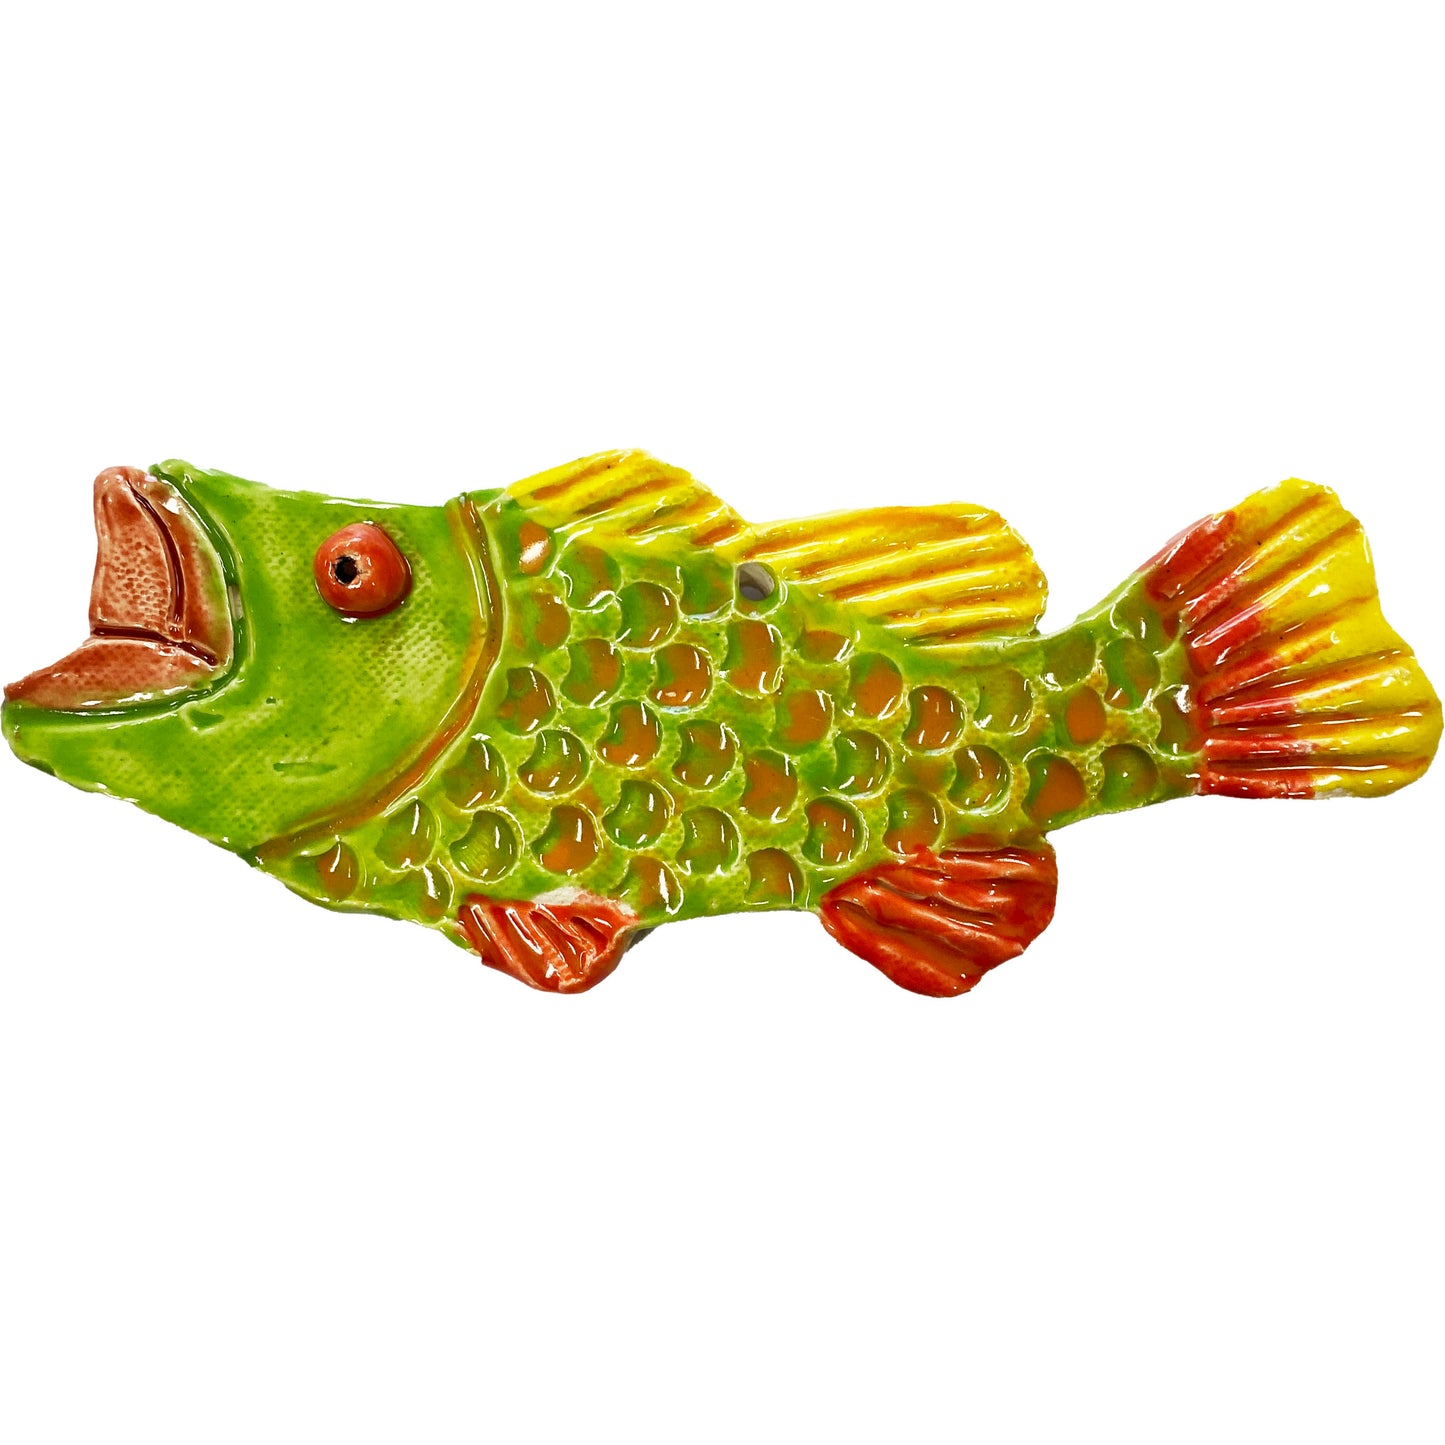 Ceramic Arts Handmade Clay Crafts Fresh Fish Glazed 7.5-inch x 3-inch by Lukas Miller and Lisa Uptain